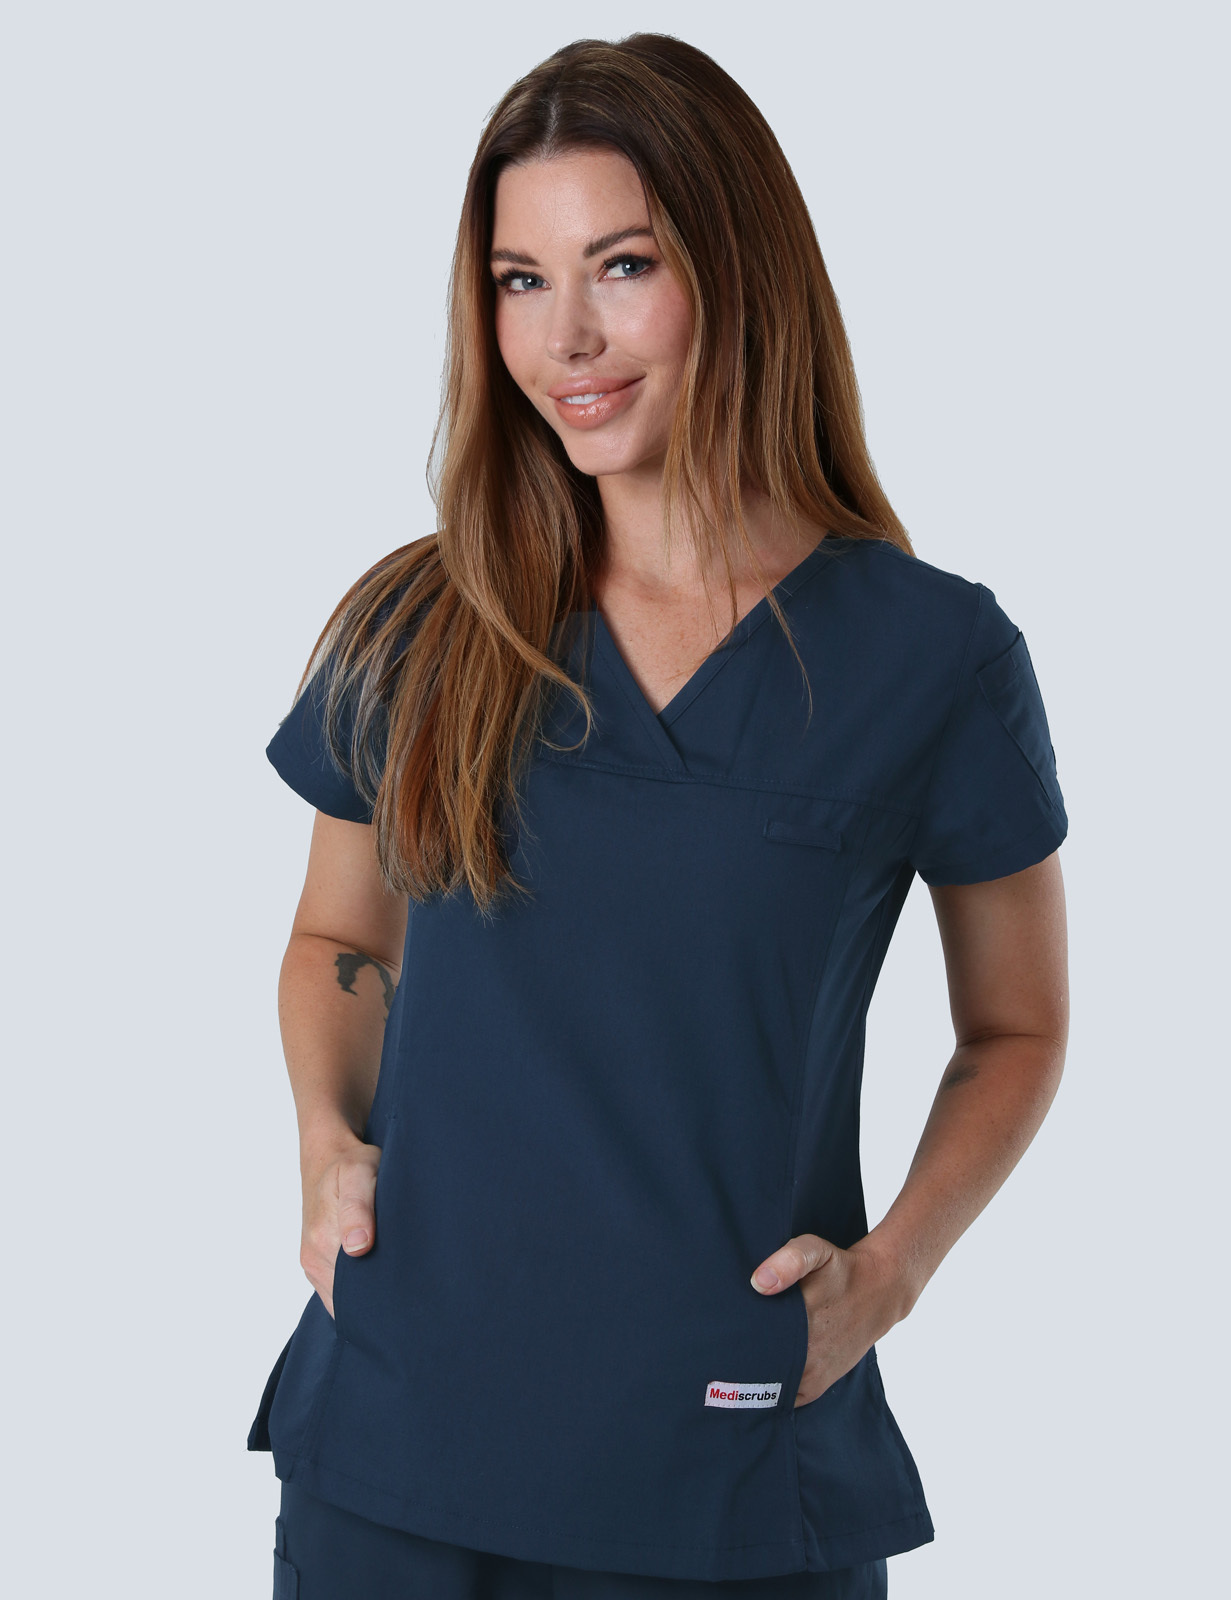 Gladstone Hospital - ED Nurse Practitioner (Women's Fit Solid Scrub Top and Cargo Pants in Navy incl Logos)